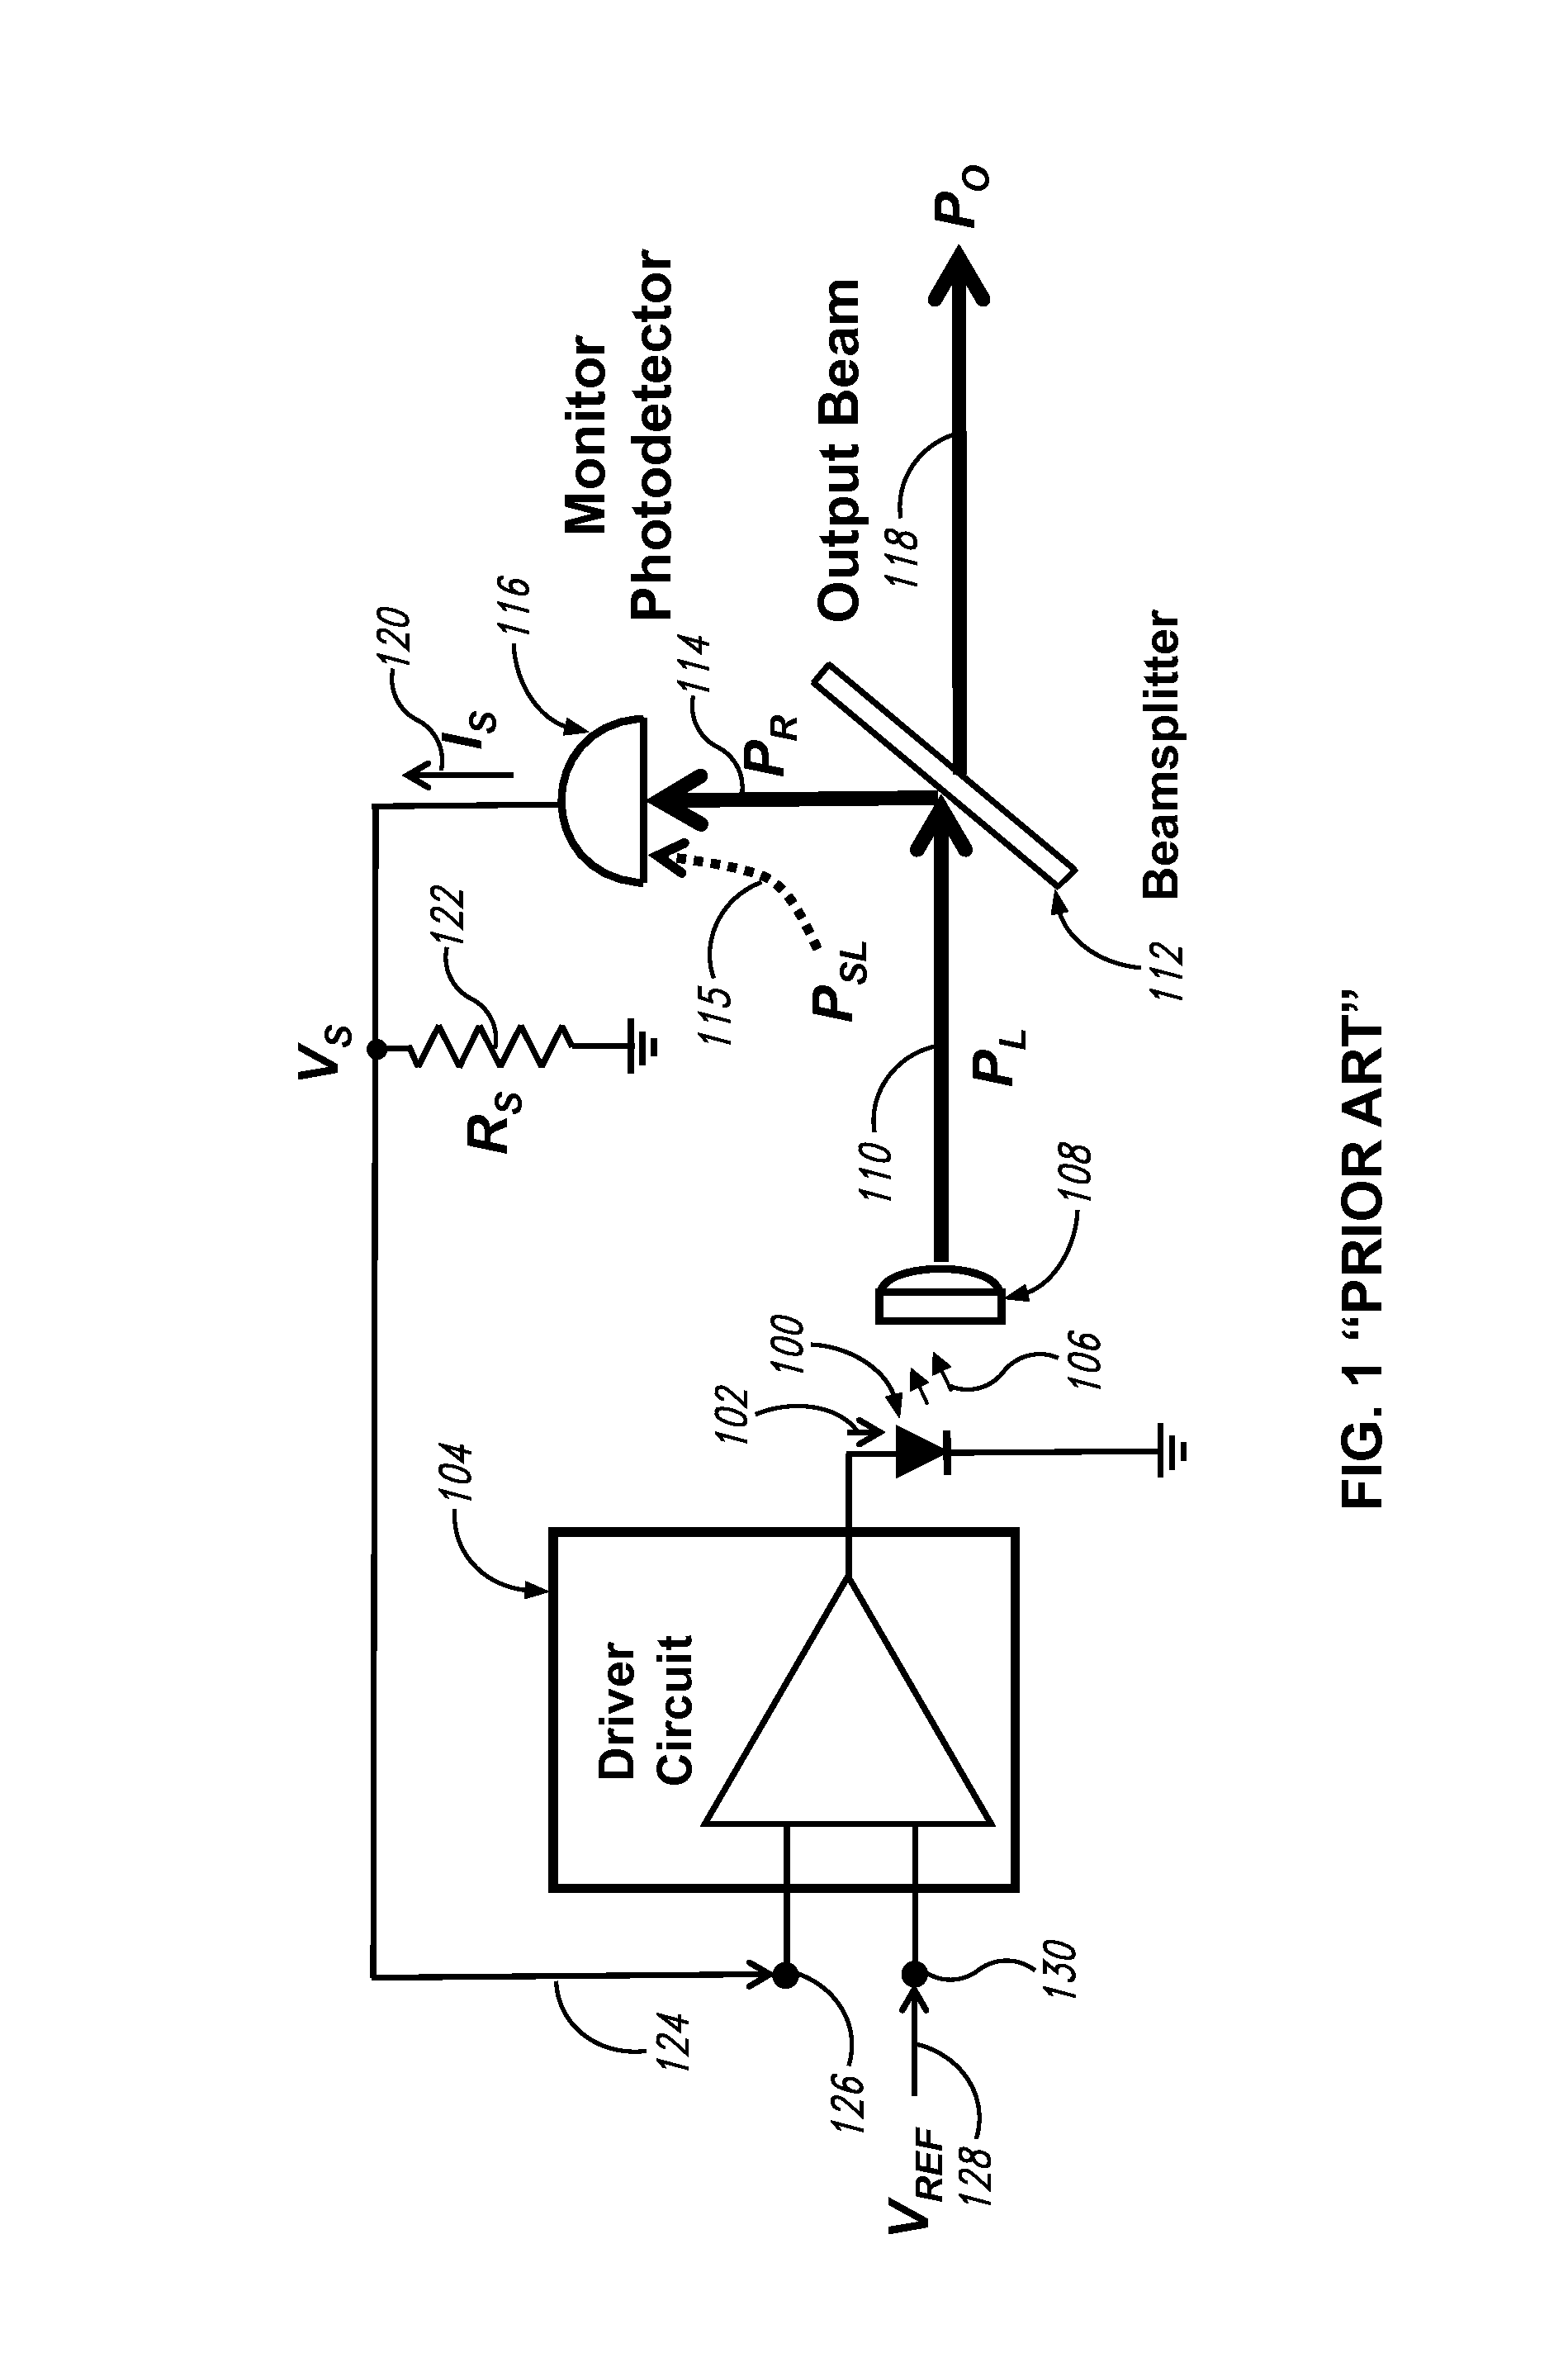 High-stability light source system and method